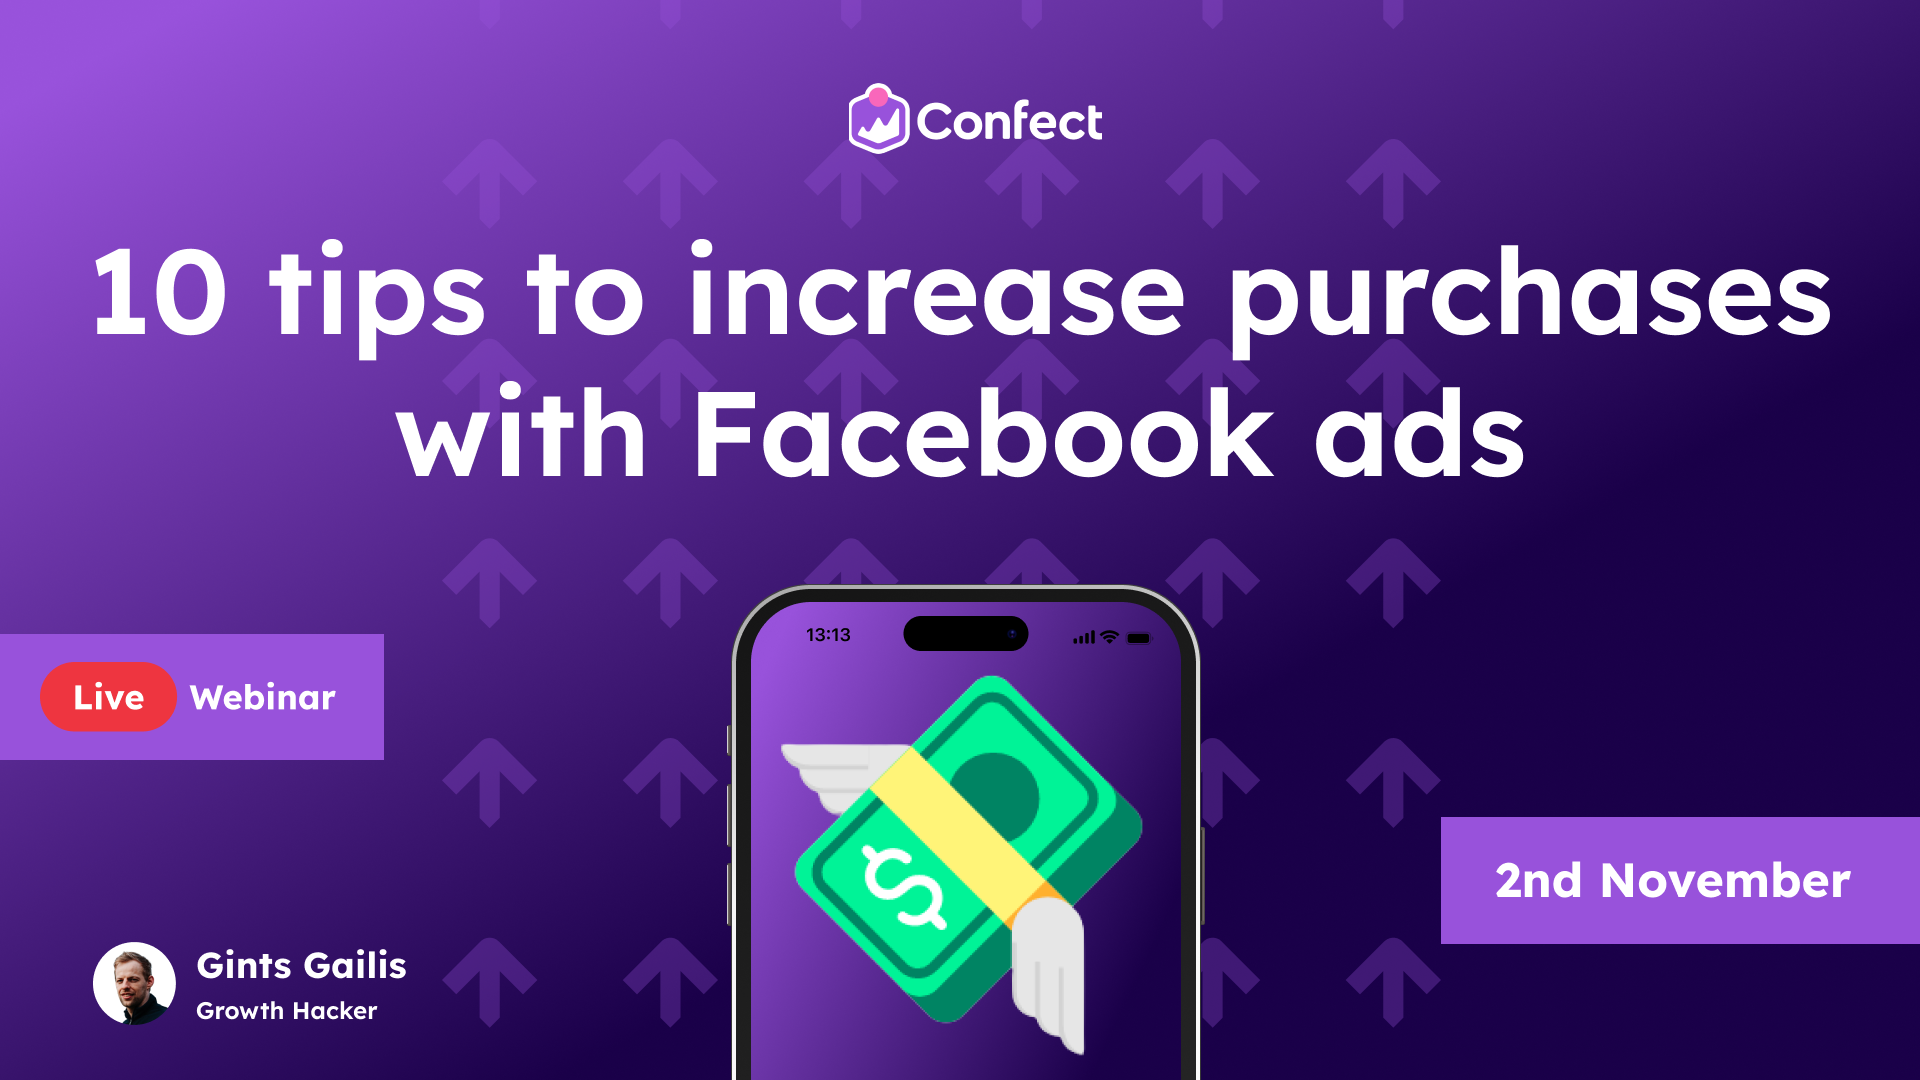 10 Tips to Increase purchases with Facebook ads